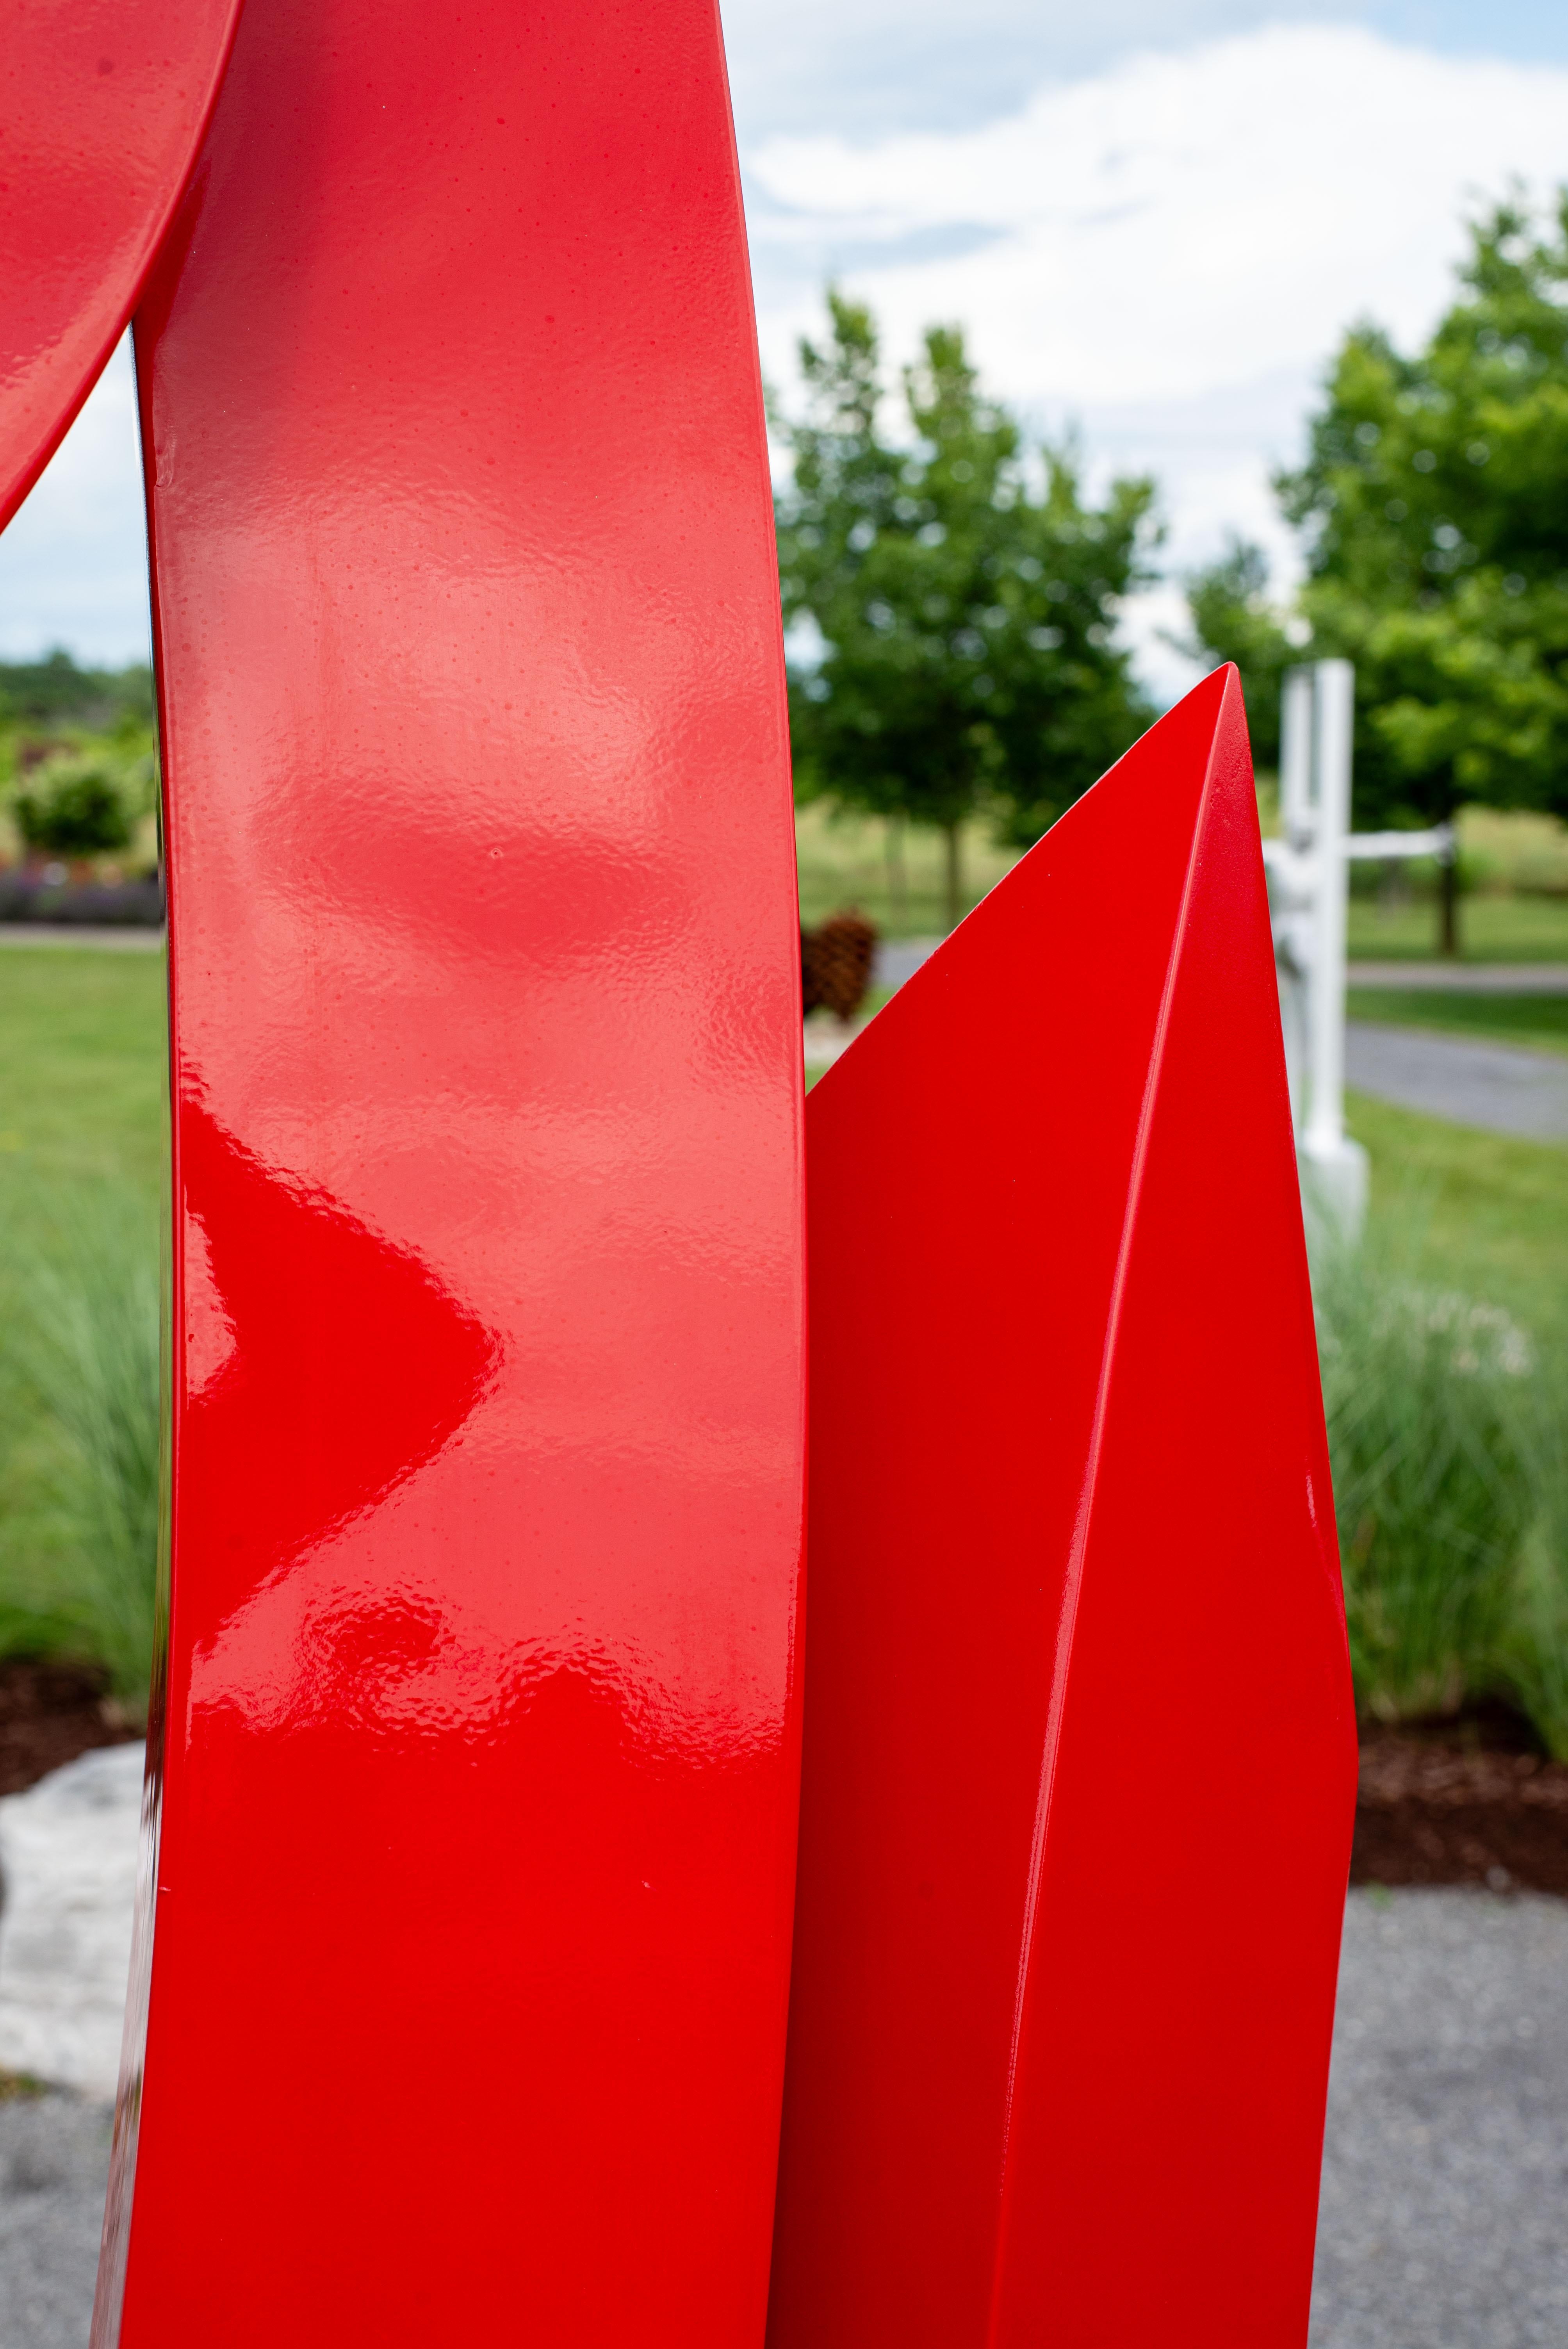 Summer Red Rhythm - contemporary, abstract, stainless steel outdoor sculpture For Sale 6